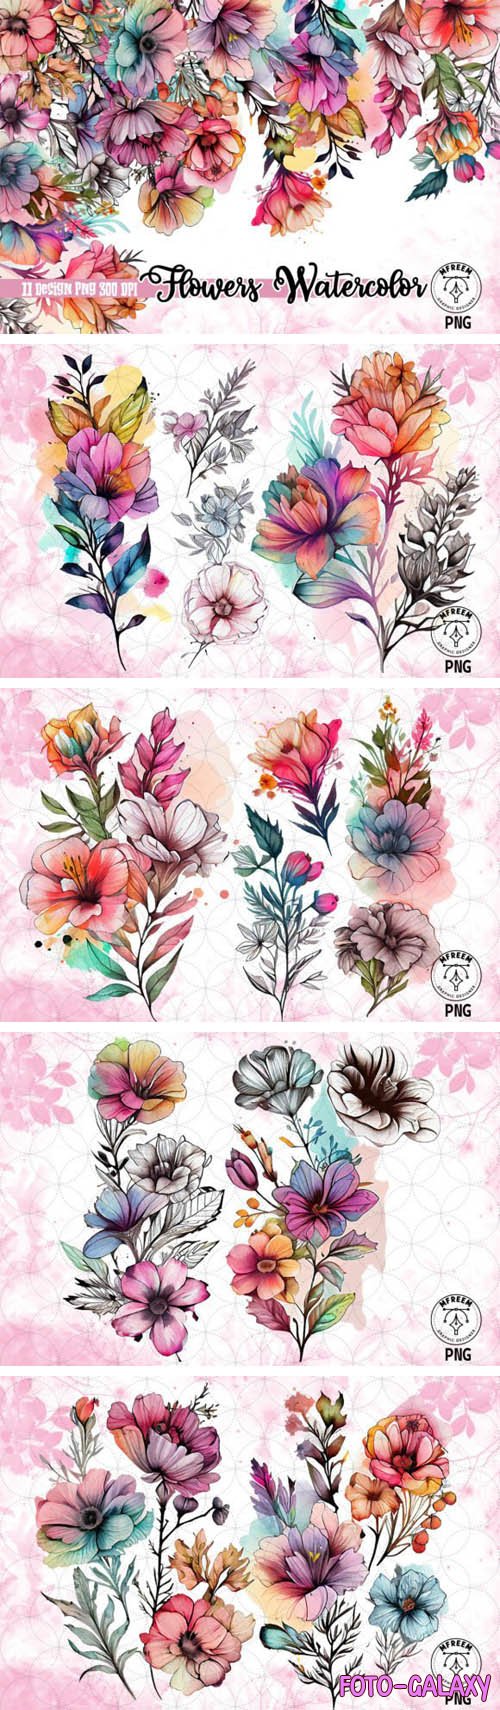 Watercolor Flowers PNG Clipart